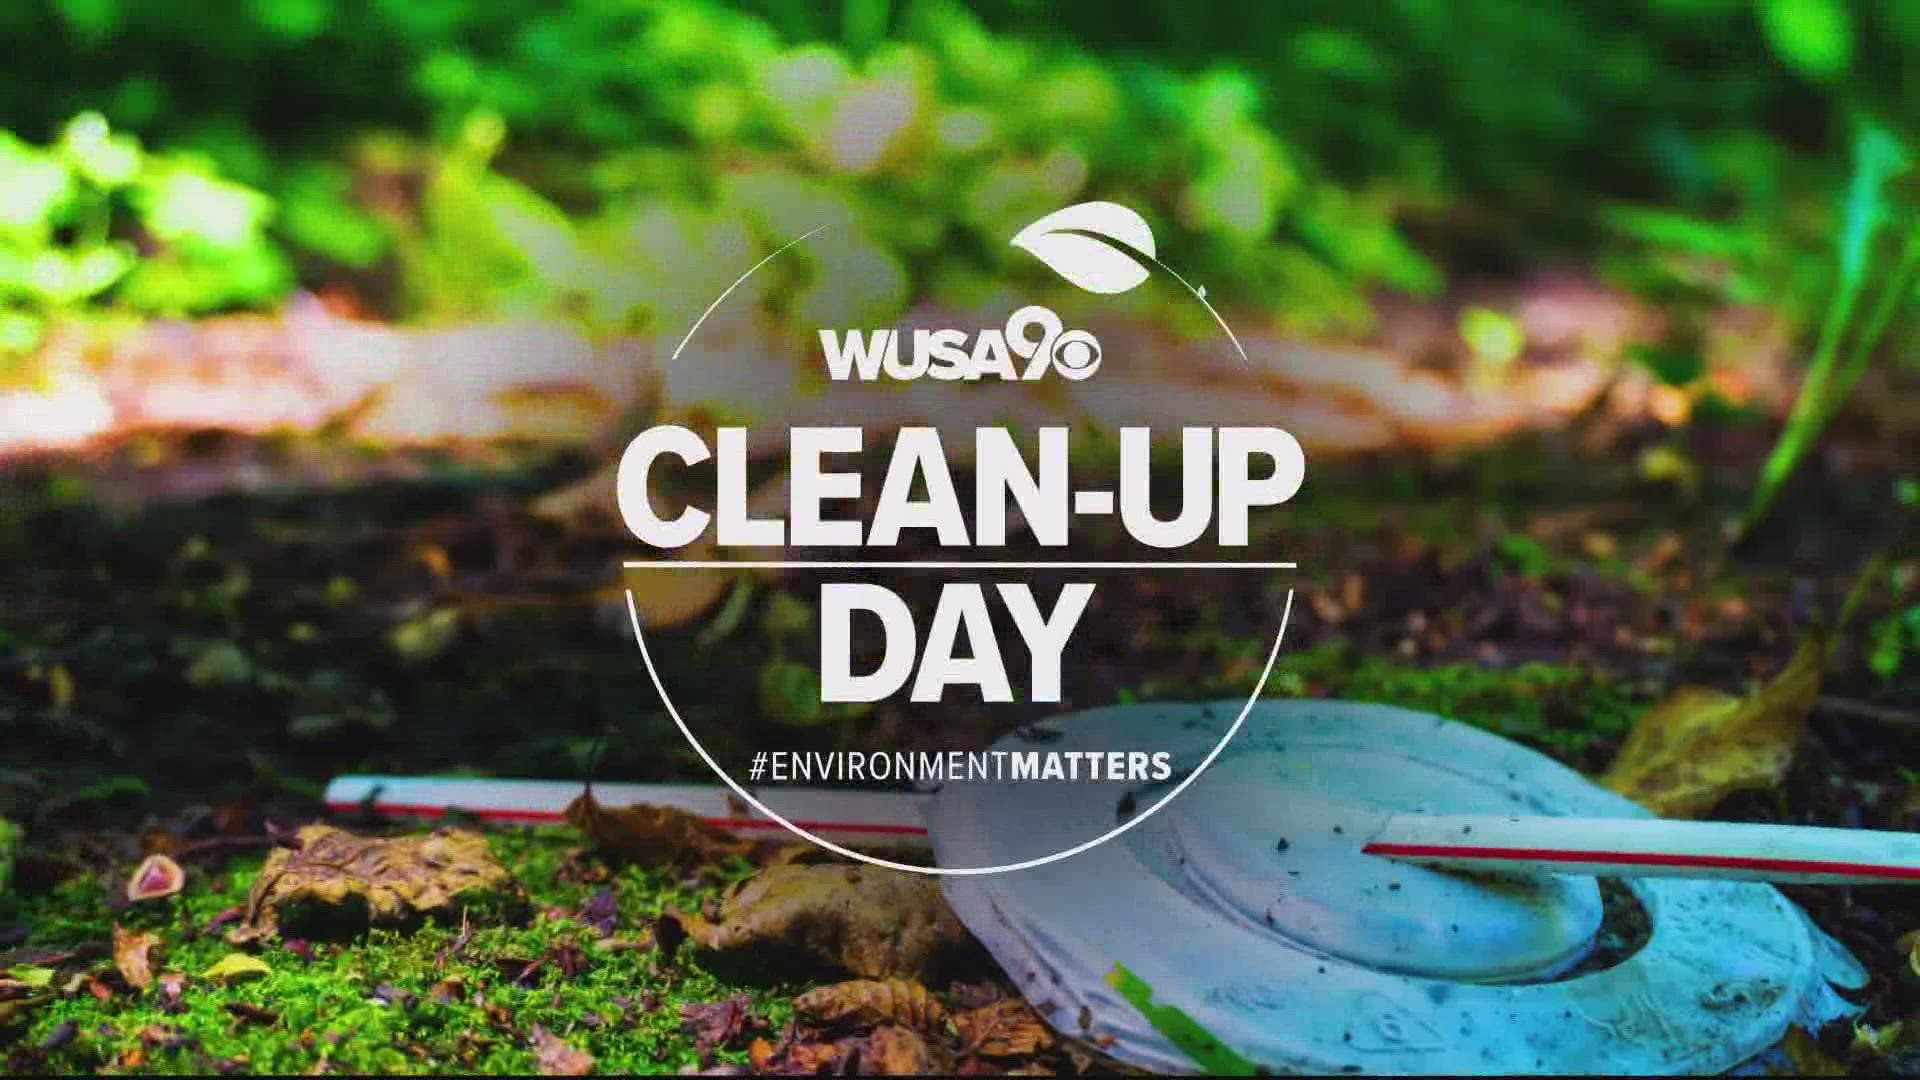 At WUSA9, we embrace #EnvironmentMatters and our May 21 Clean-Up Day event is a chance to help make several outdoor areas of the DMV fresh and clean!